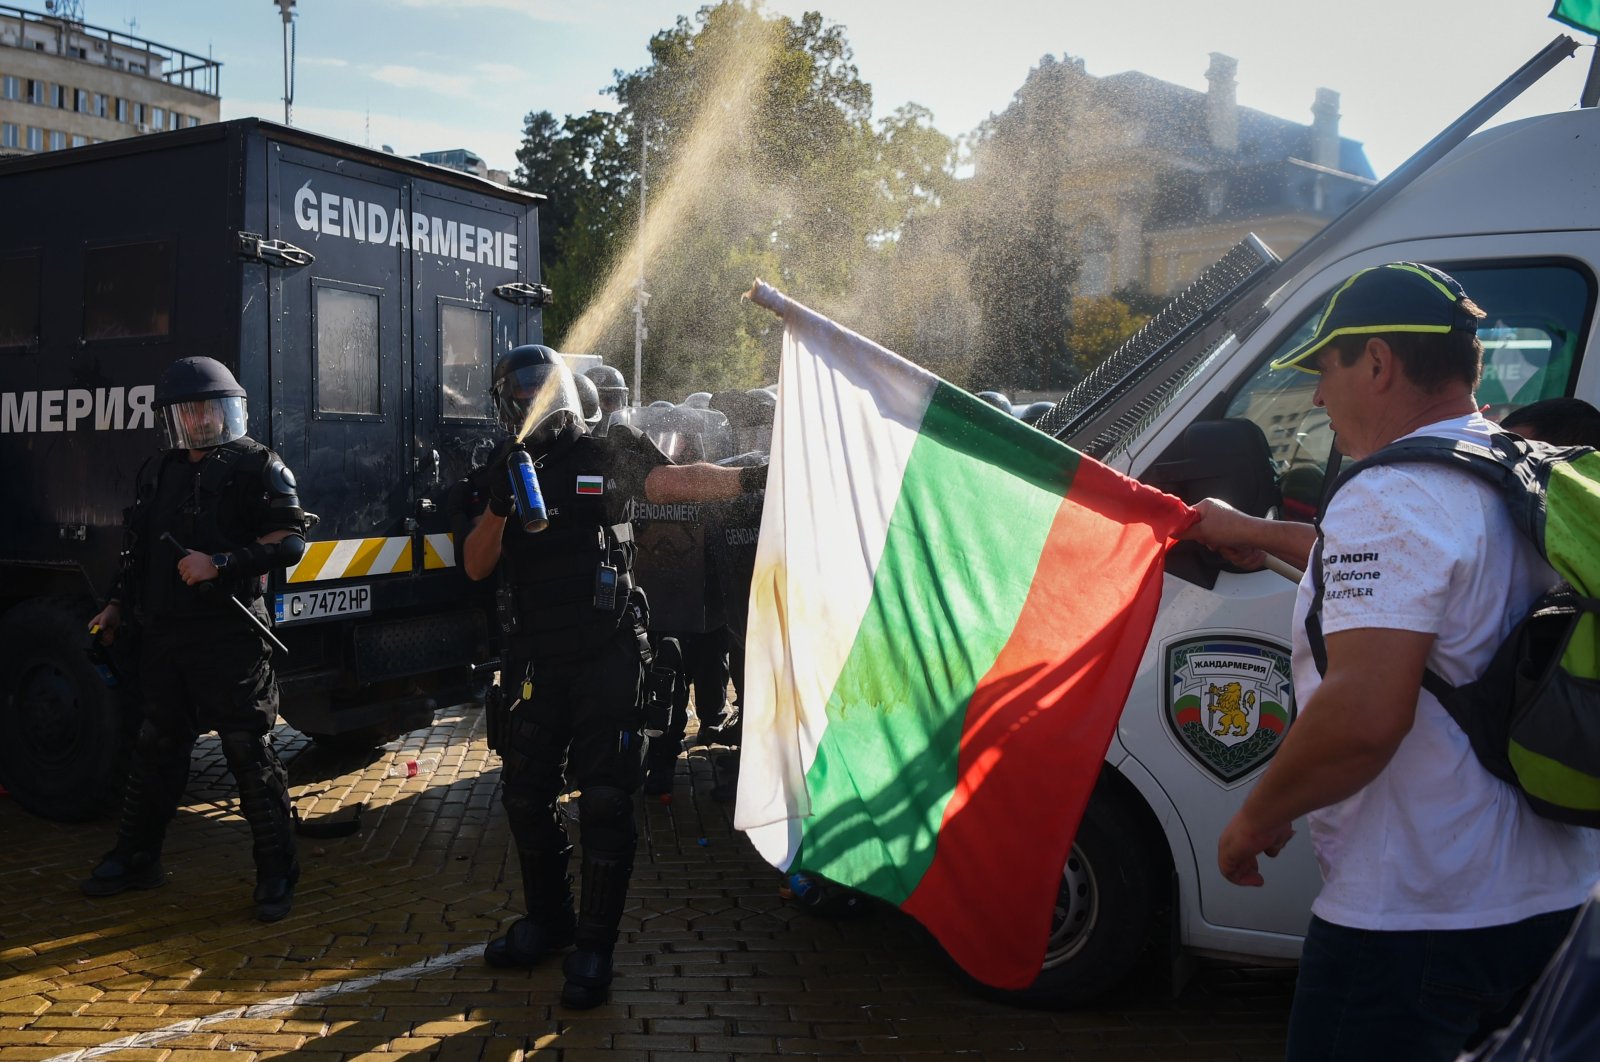 A police officer uses pepper spray in front of a man holding a Bulgarian national flag, as clashes erupt during an anti-government demonstration while parliament discusses changing the constitution, Sofia, Bulgaria, Sept. 2, 2020. (AFP Photo)